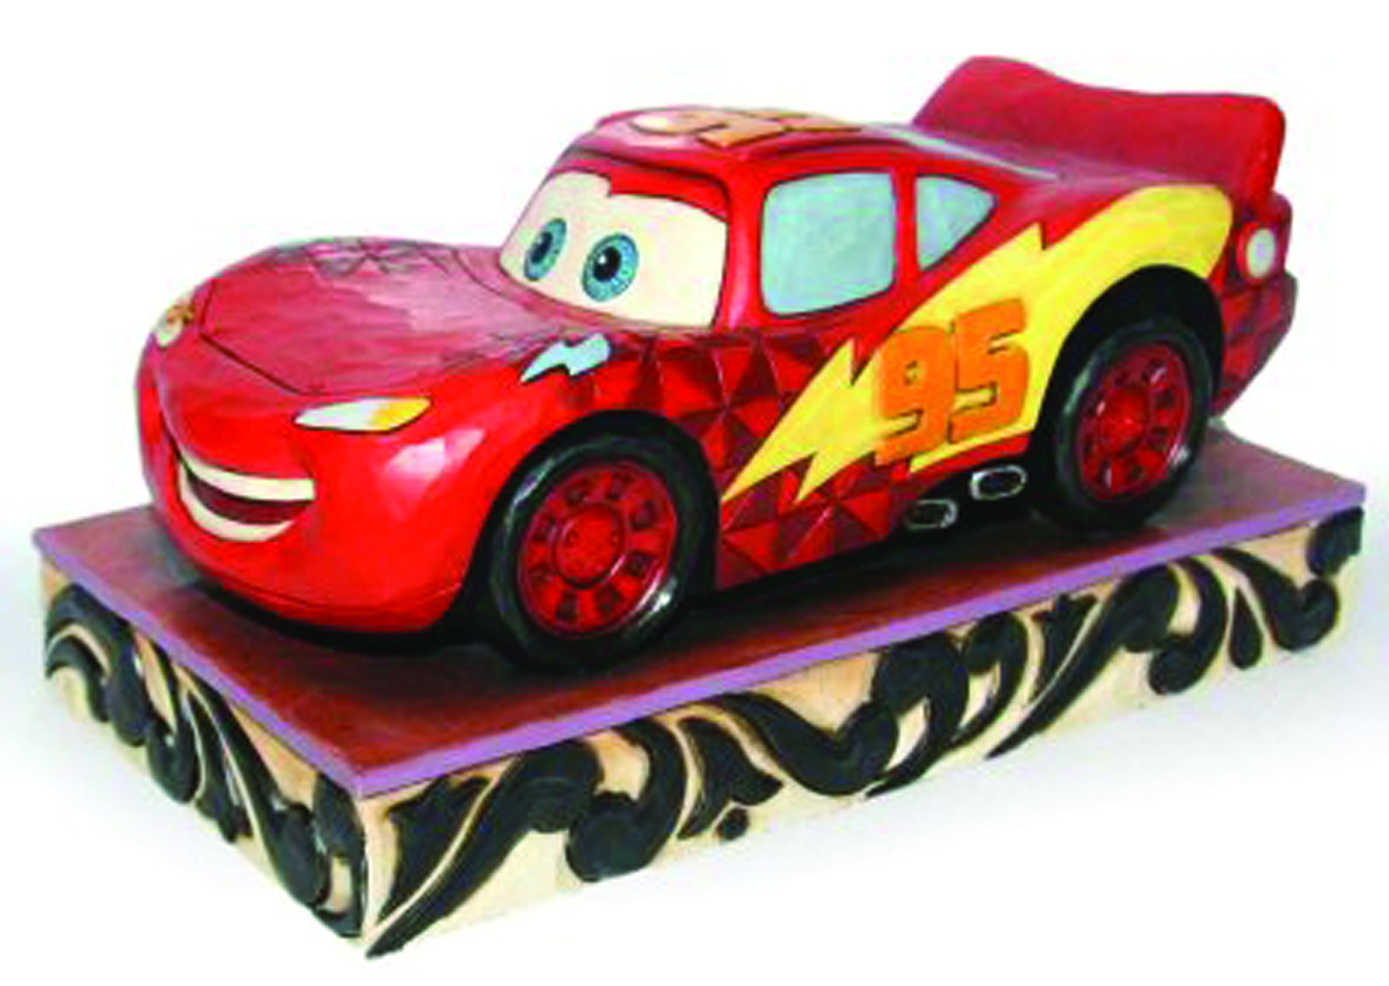  Enesco Disney Traditions by Jim Shore Lightning McQueen Figurine,  3-Inch : Home & Kitchen